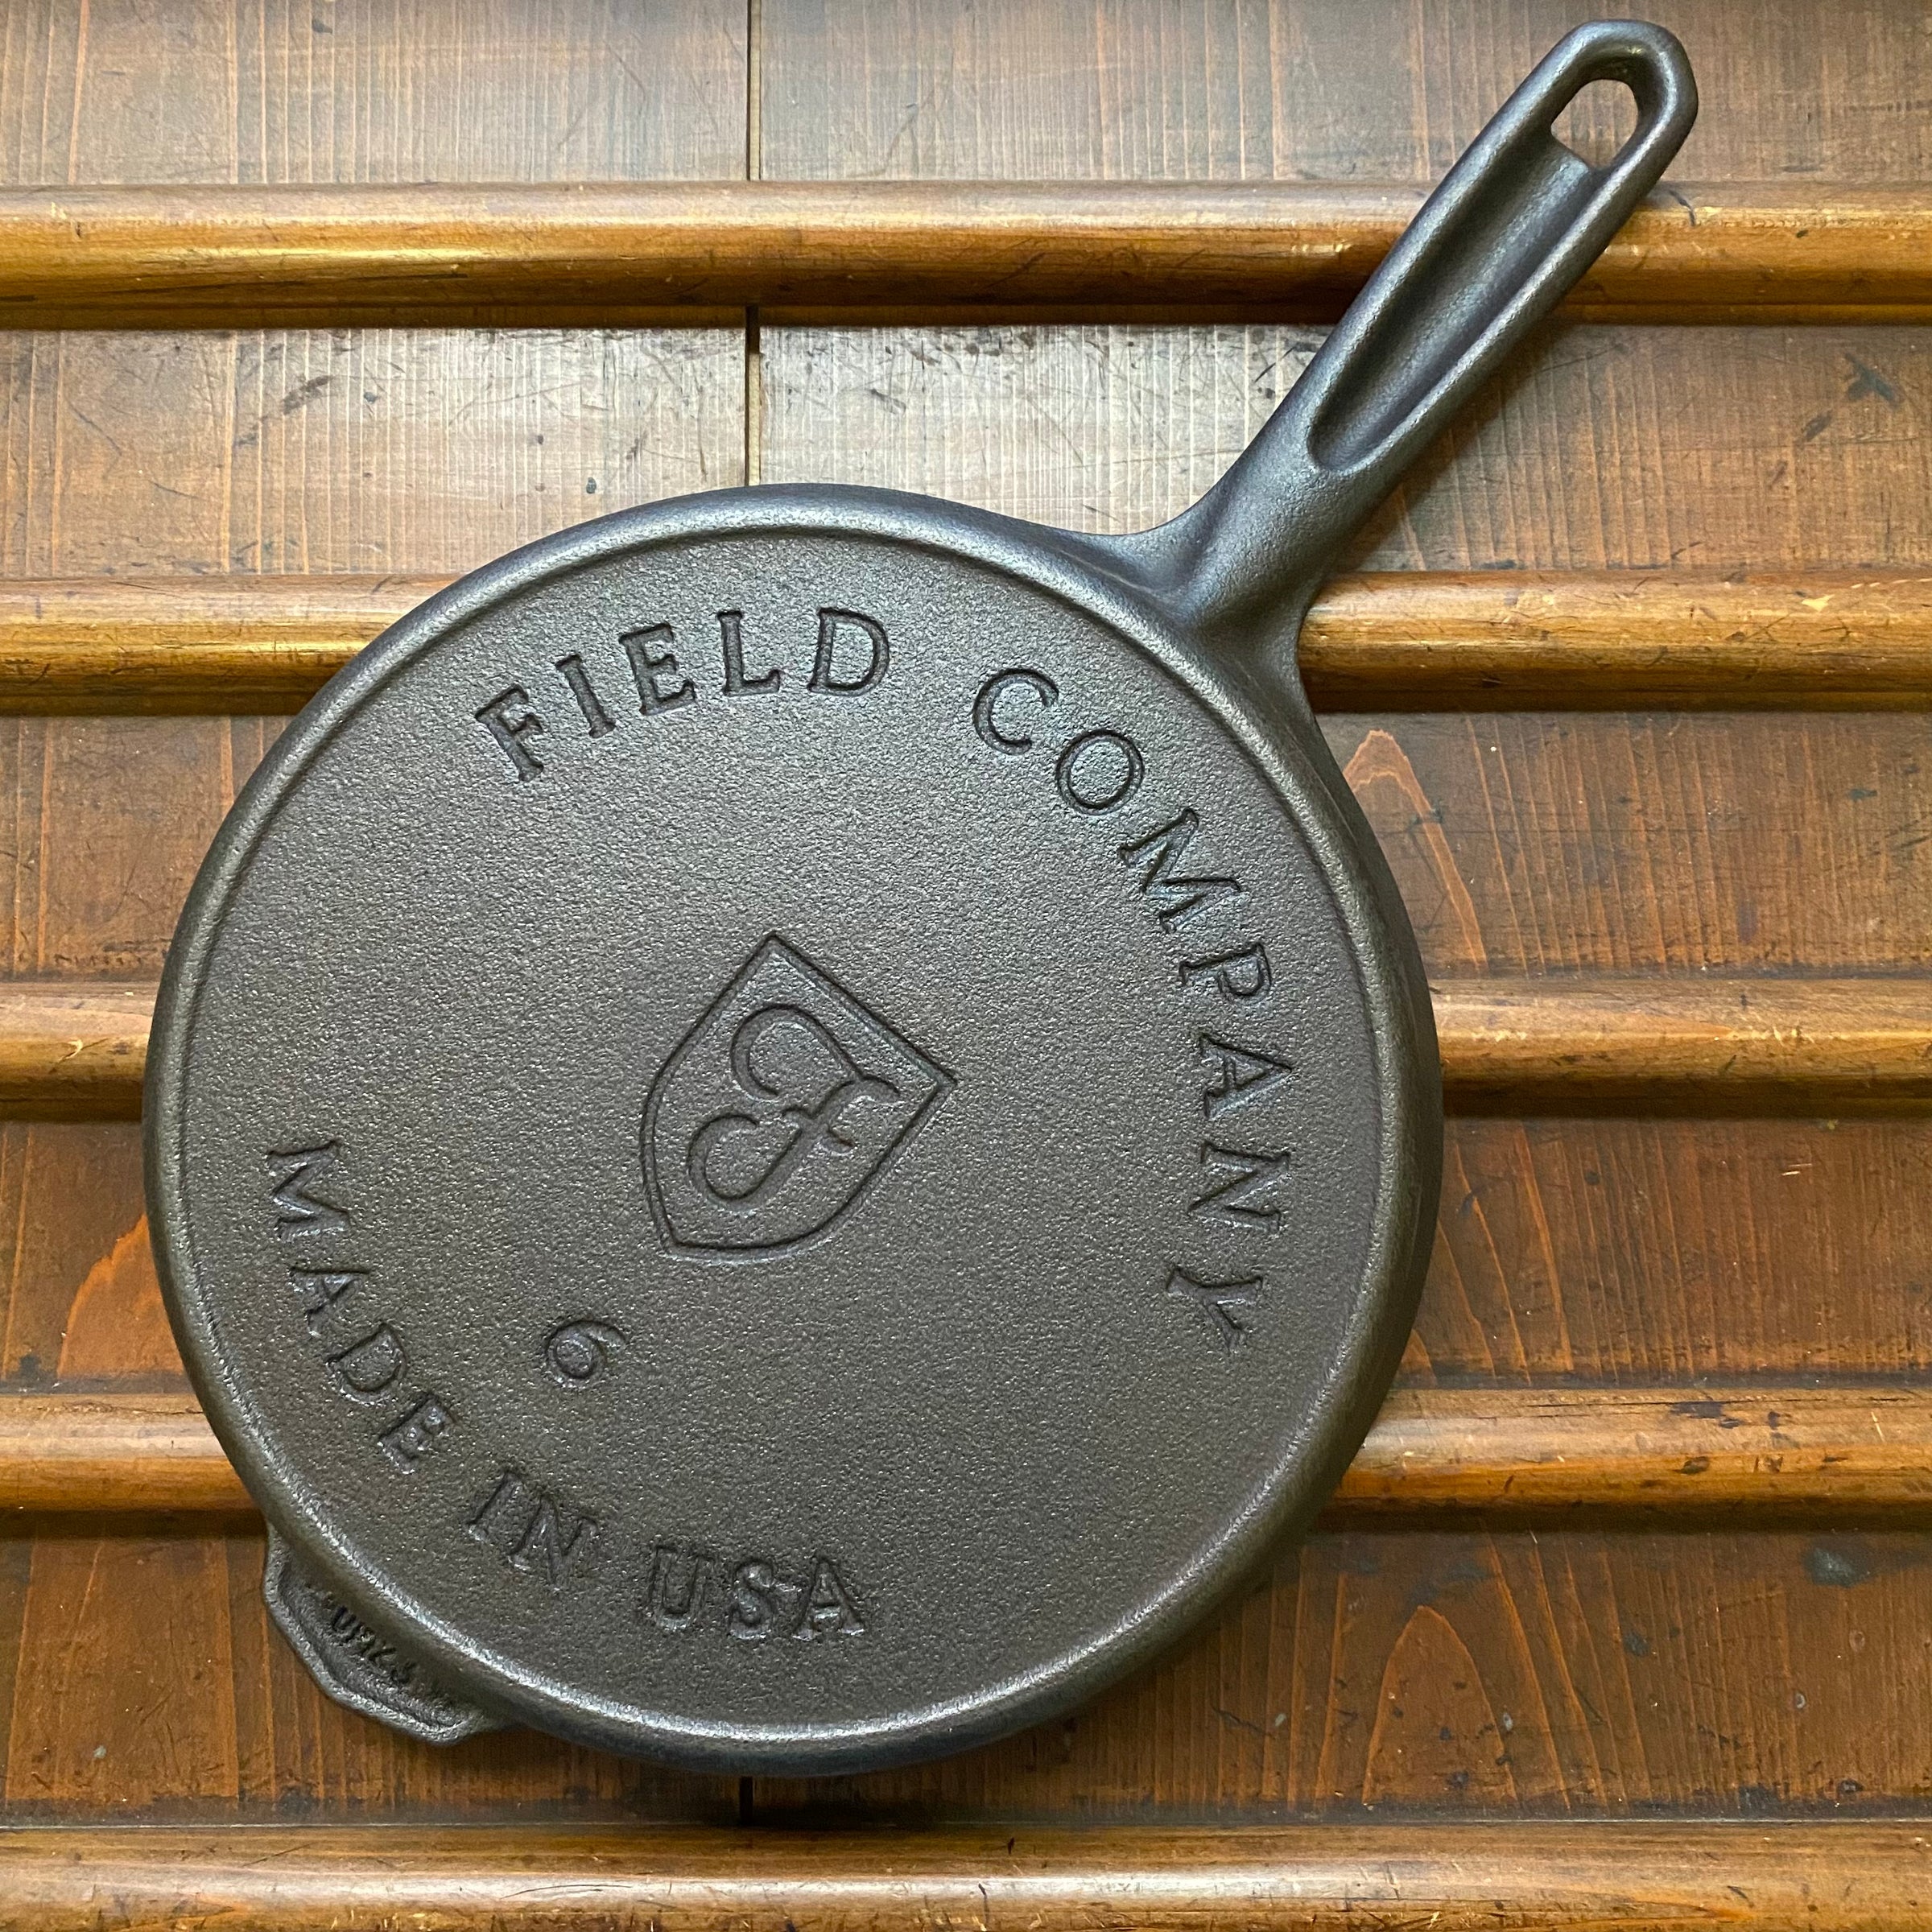 FIELD COMPANY 8-3/8 in. No. 6 Cast Iron Skillet 856133007061 - The